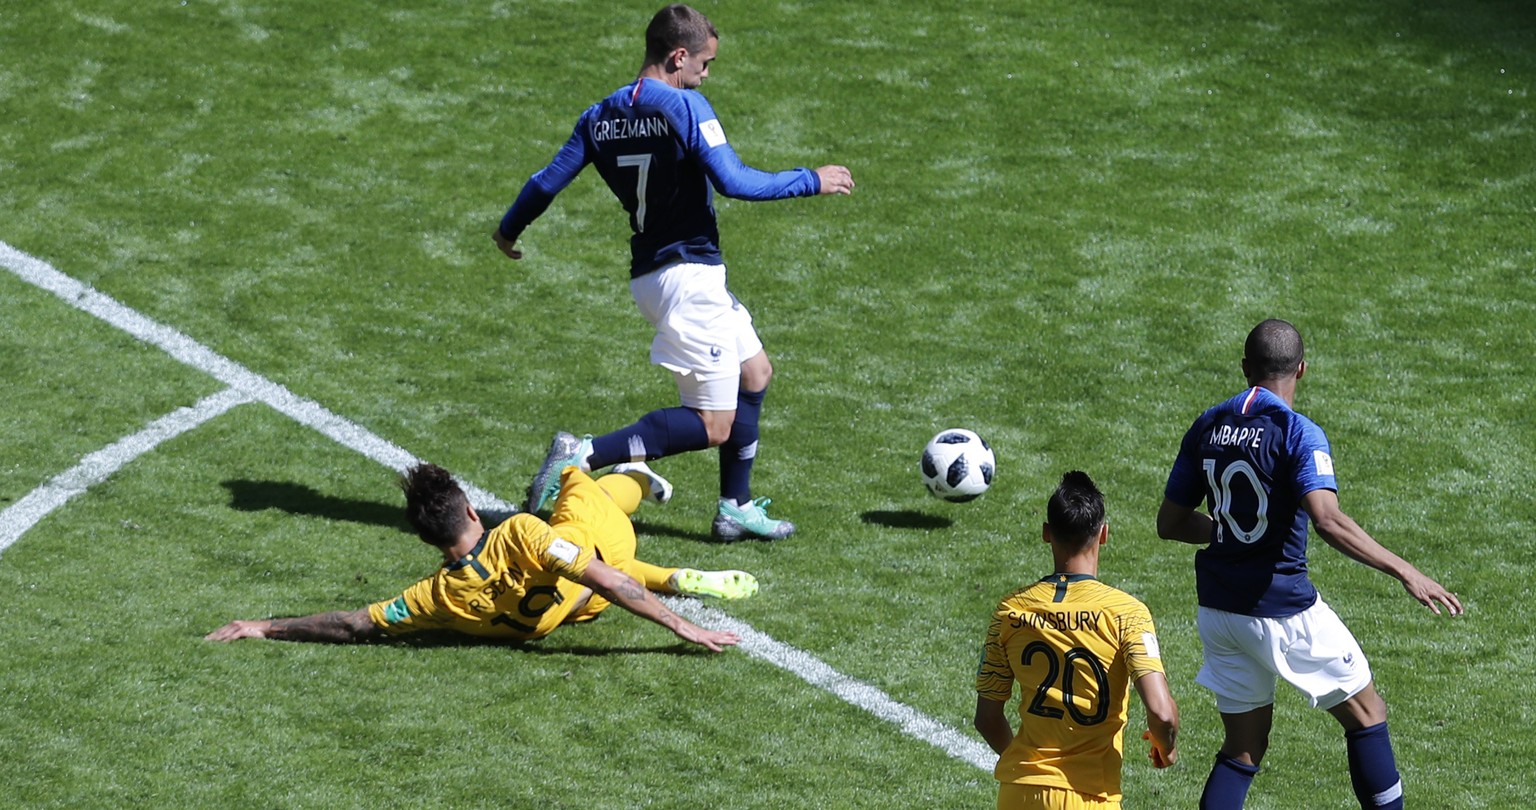 Australia&#039;s Joshua Risdon, left, tackles France&#039;s Antoine Griezmann, second left conceding a penalty kick for France during the group C match between France and Australia at the 2018 soccer  ...